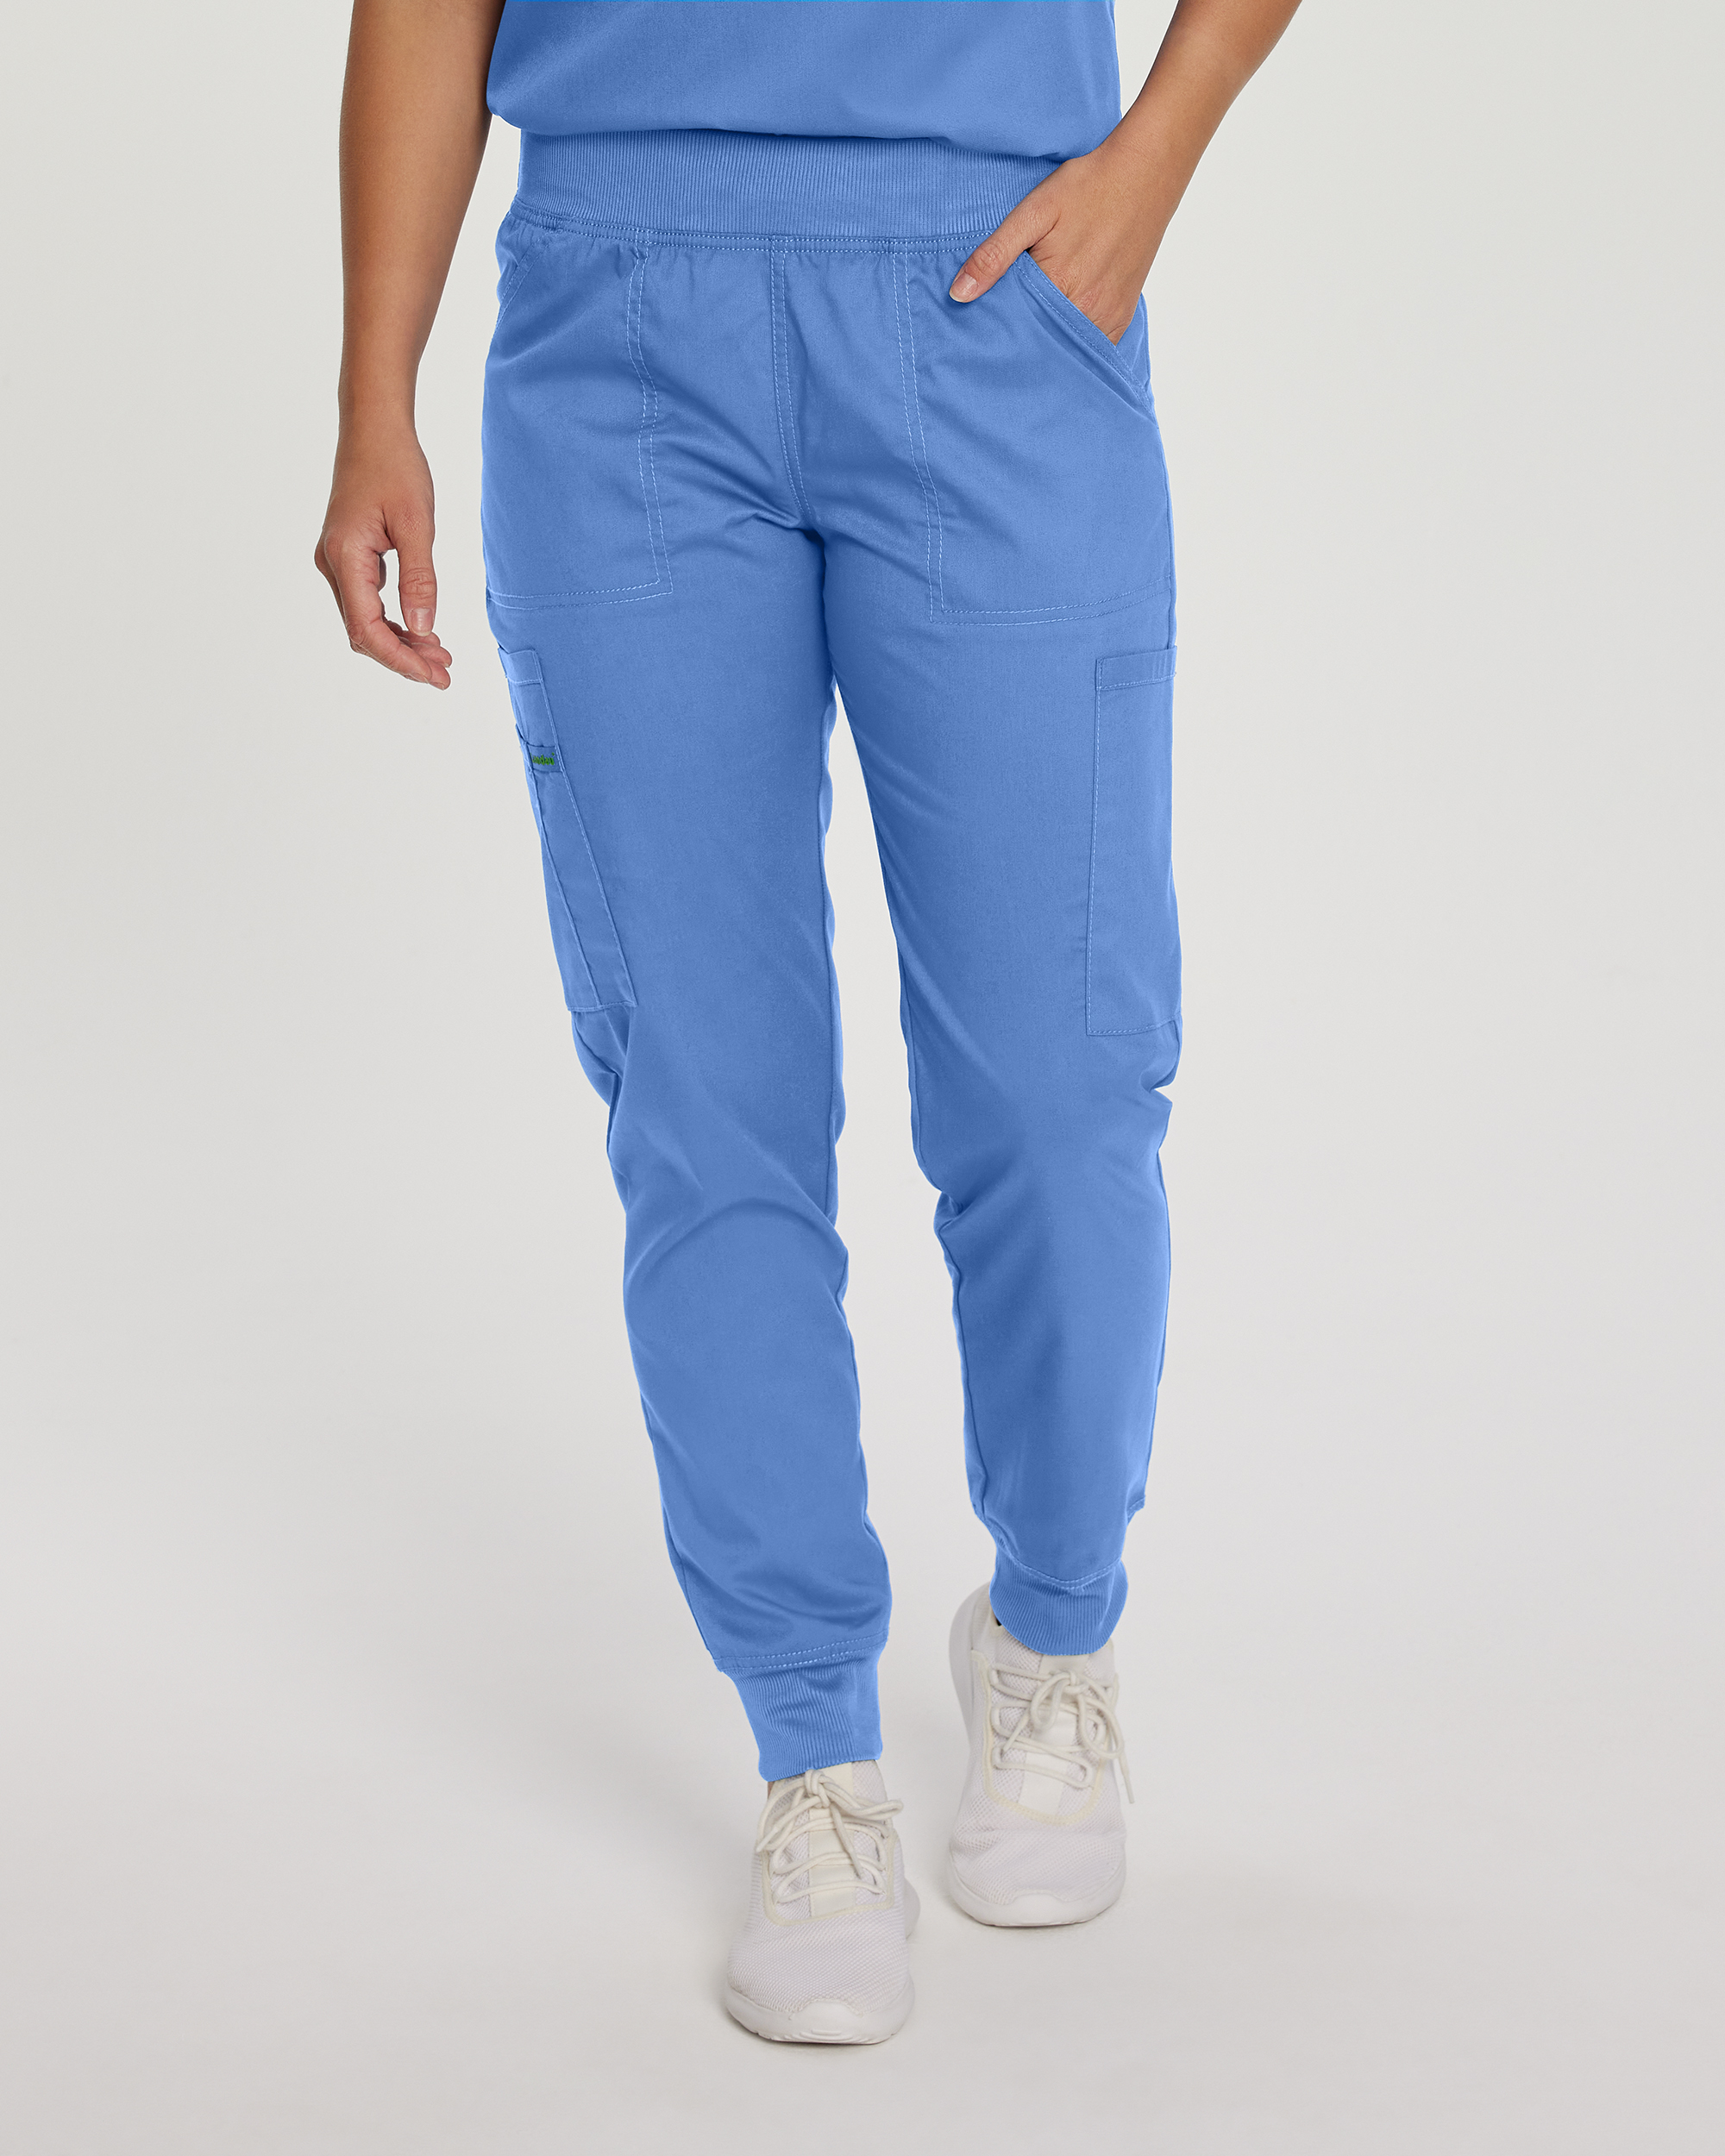 What material are these jogger scrub pants made of?